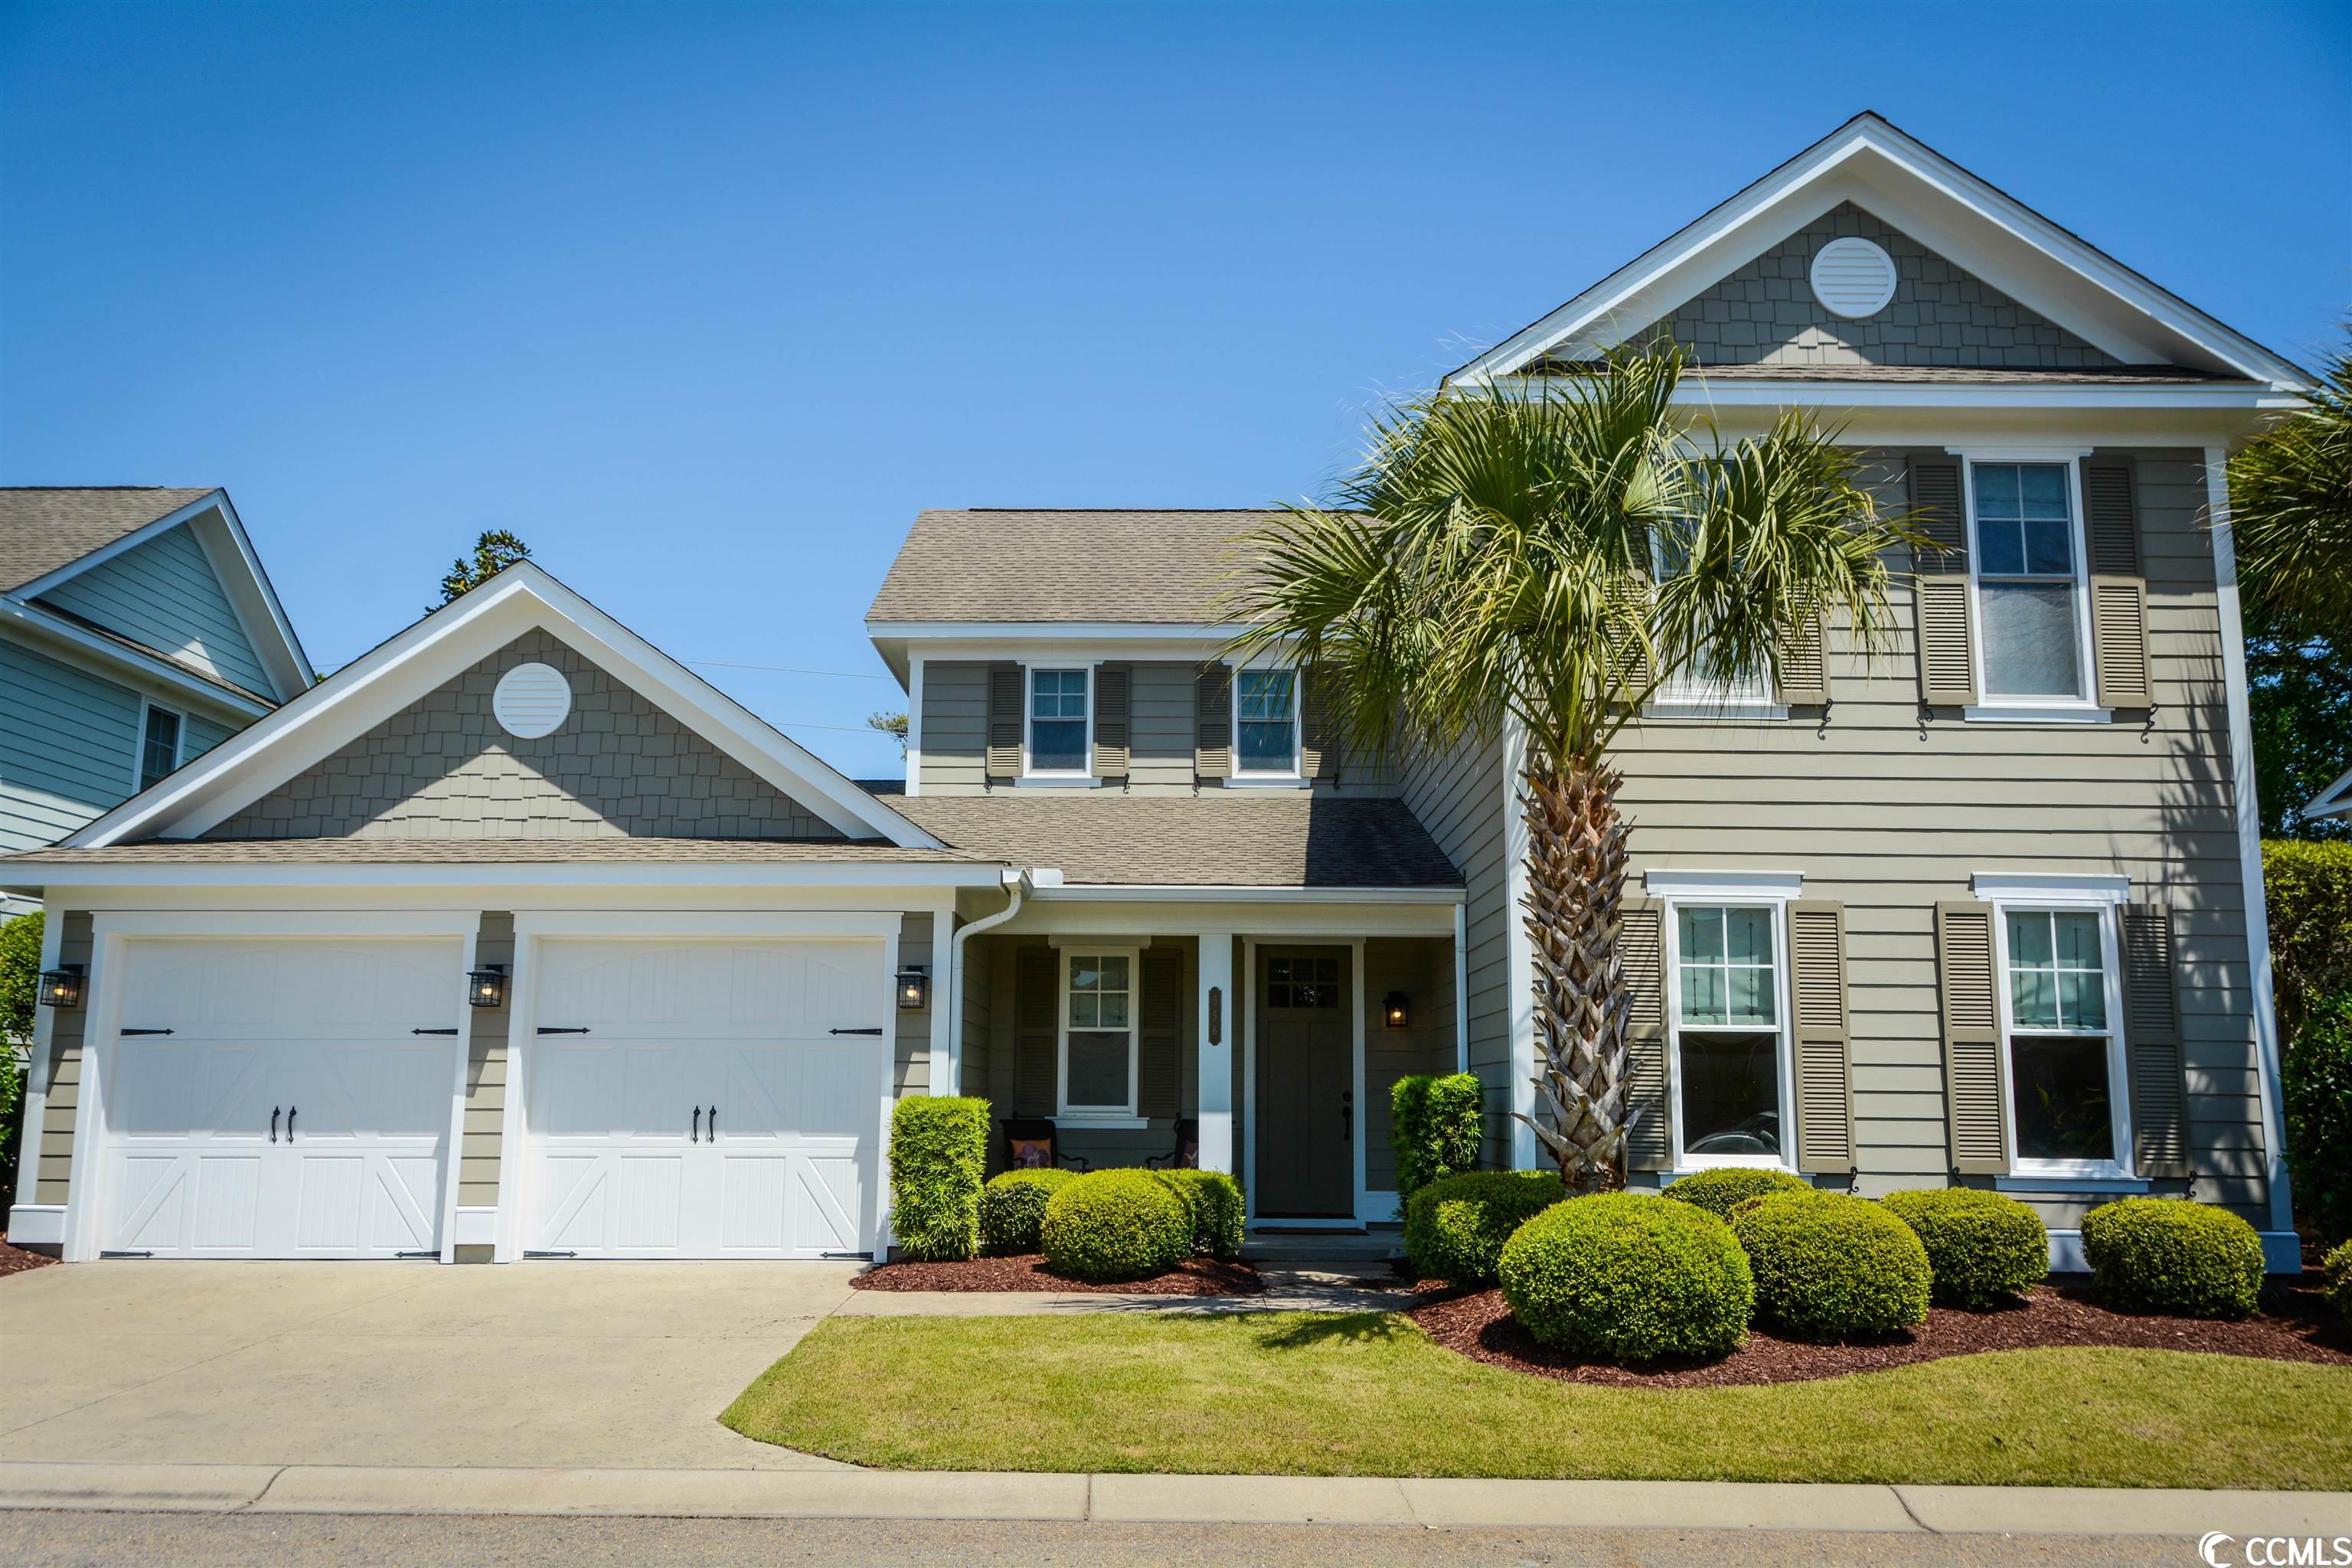 556 Olde Mill Dr., North Myrtle Beach, SC 29582